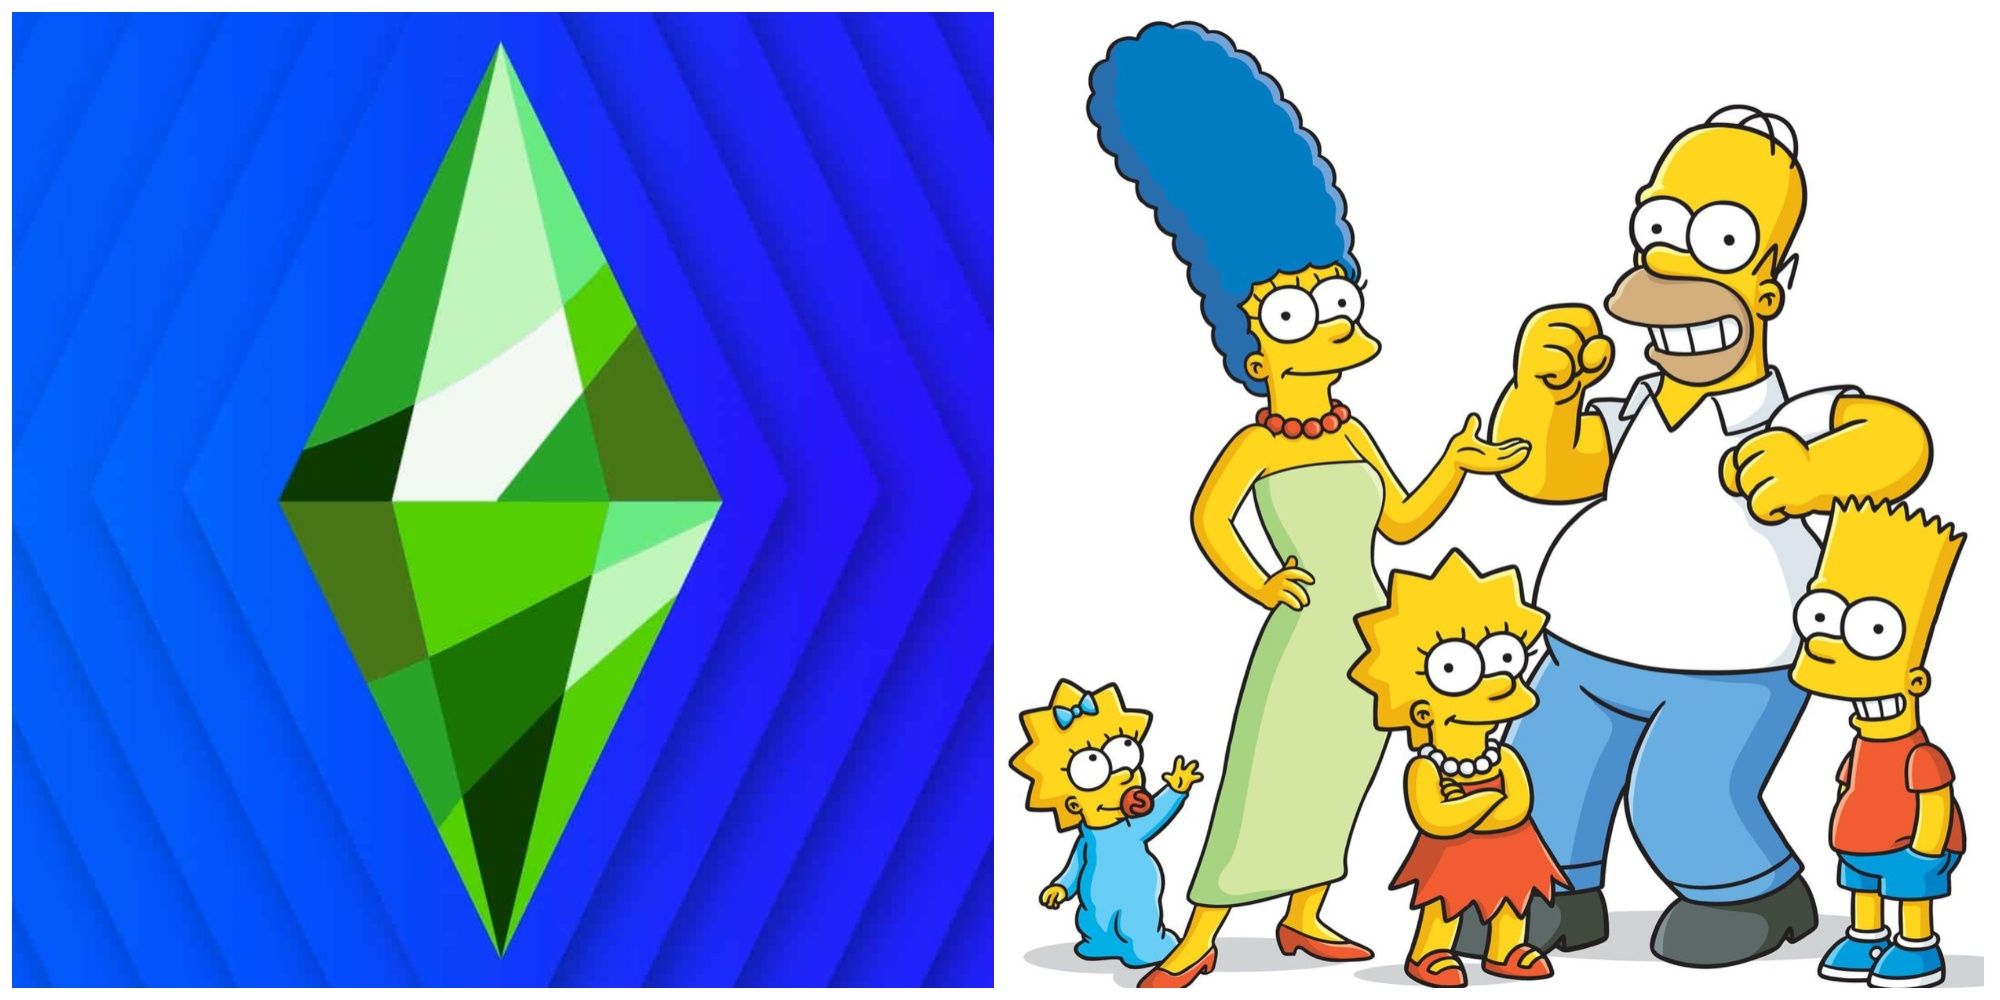 The Sims and The Simpsons